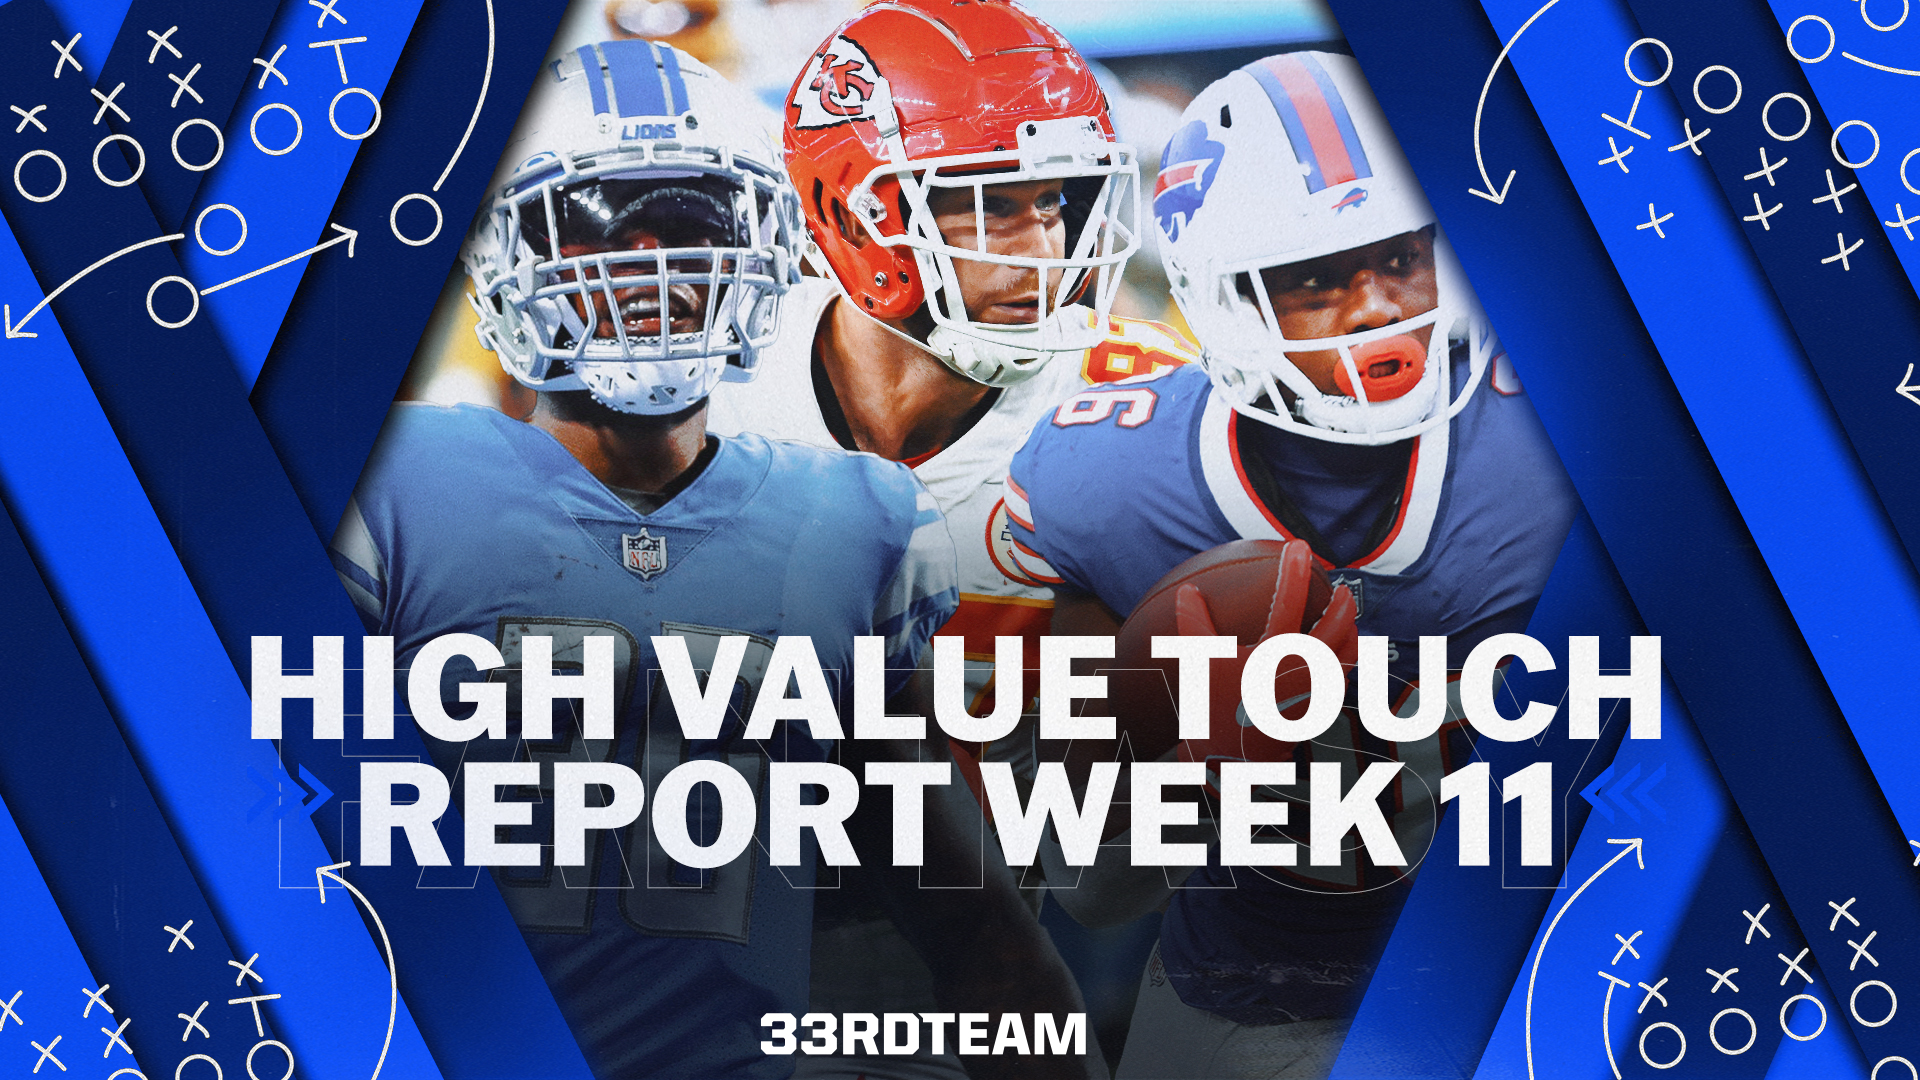 High-Value Touch Report: Week 11 Fantasy Football Rushing, Receiving Data